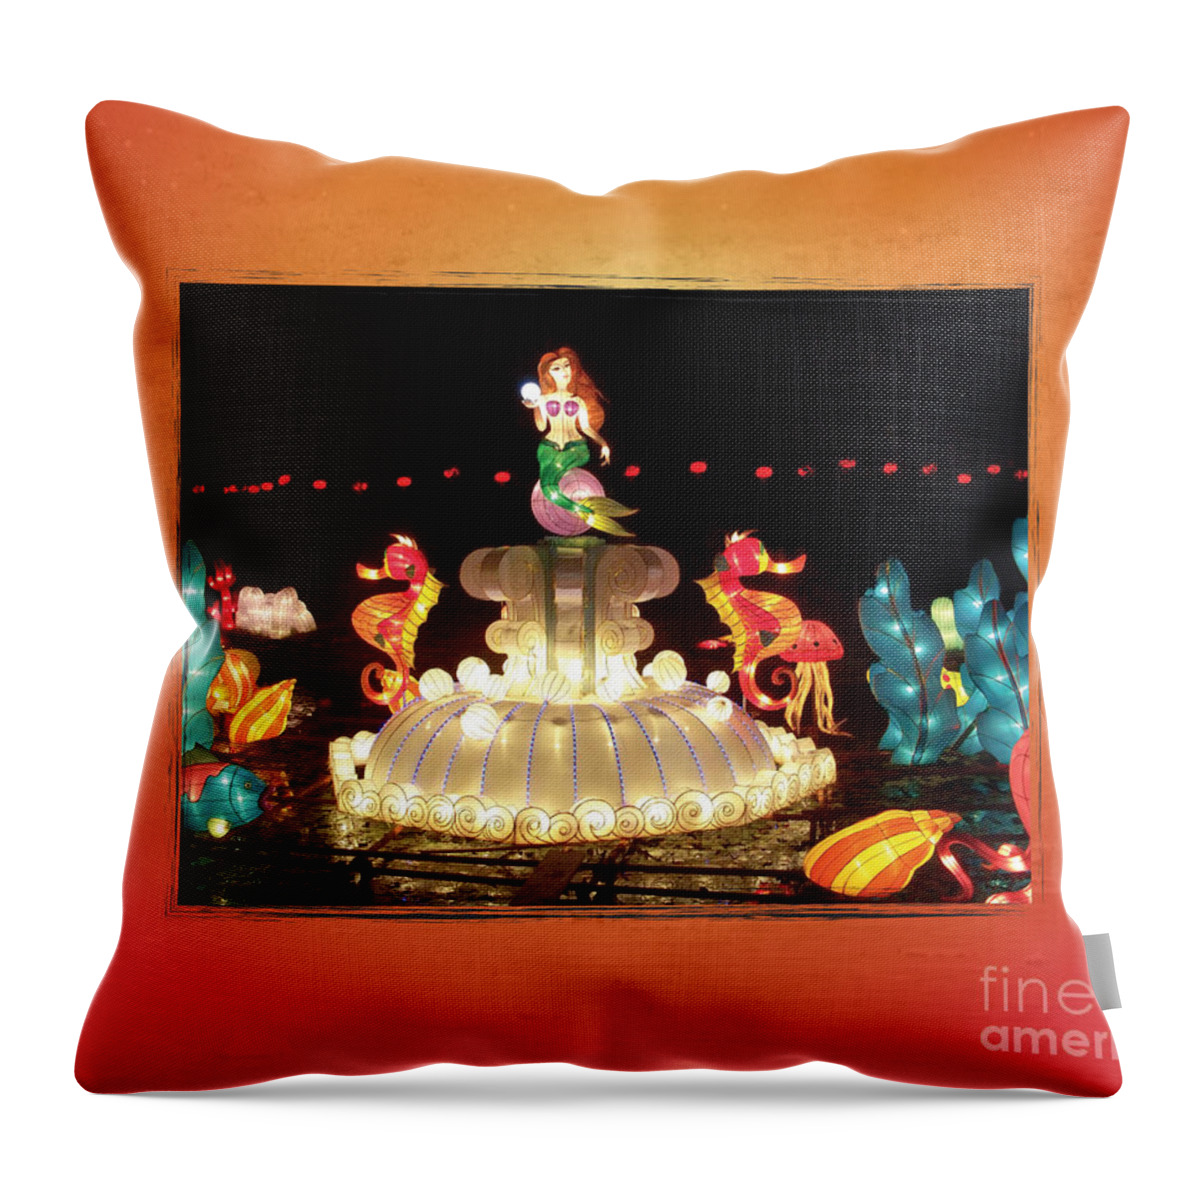 Chinese Lantern Festival Throw Pillow featuring the photograph Mermaid by Cheryl McClure